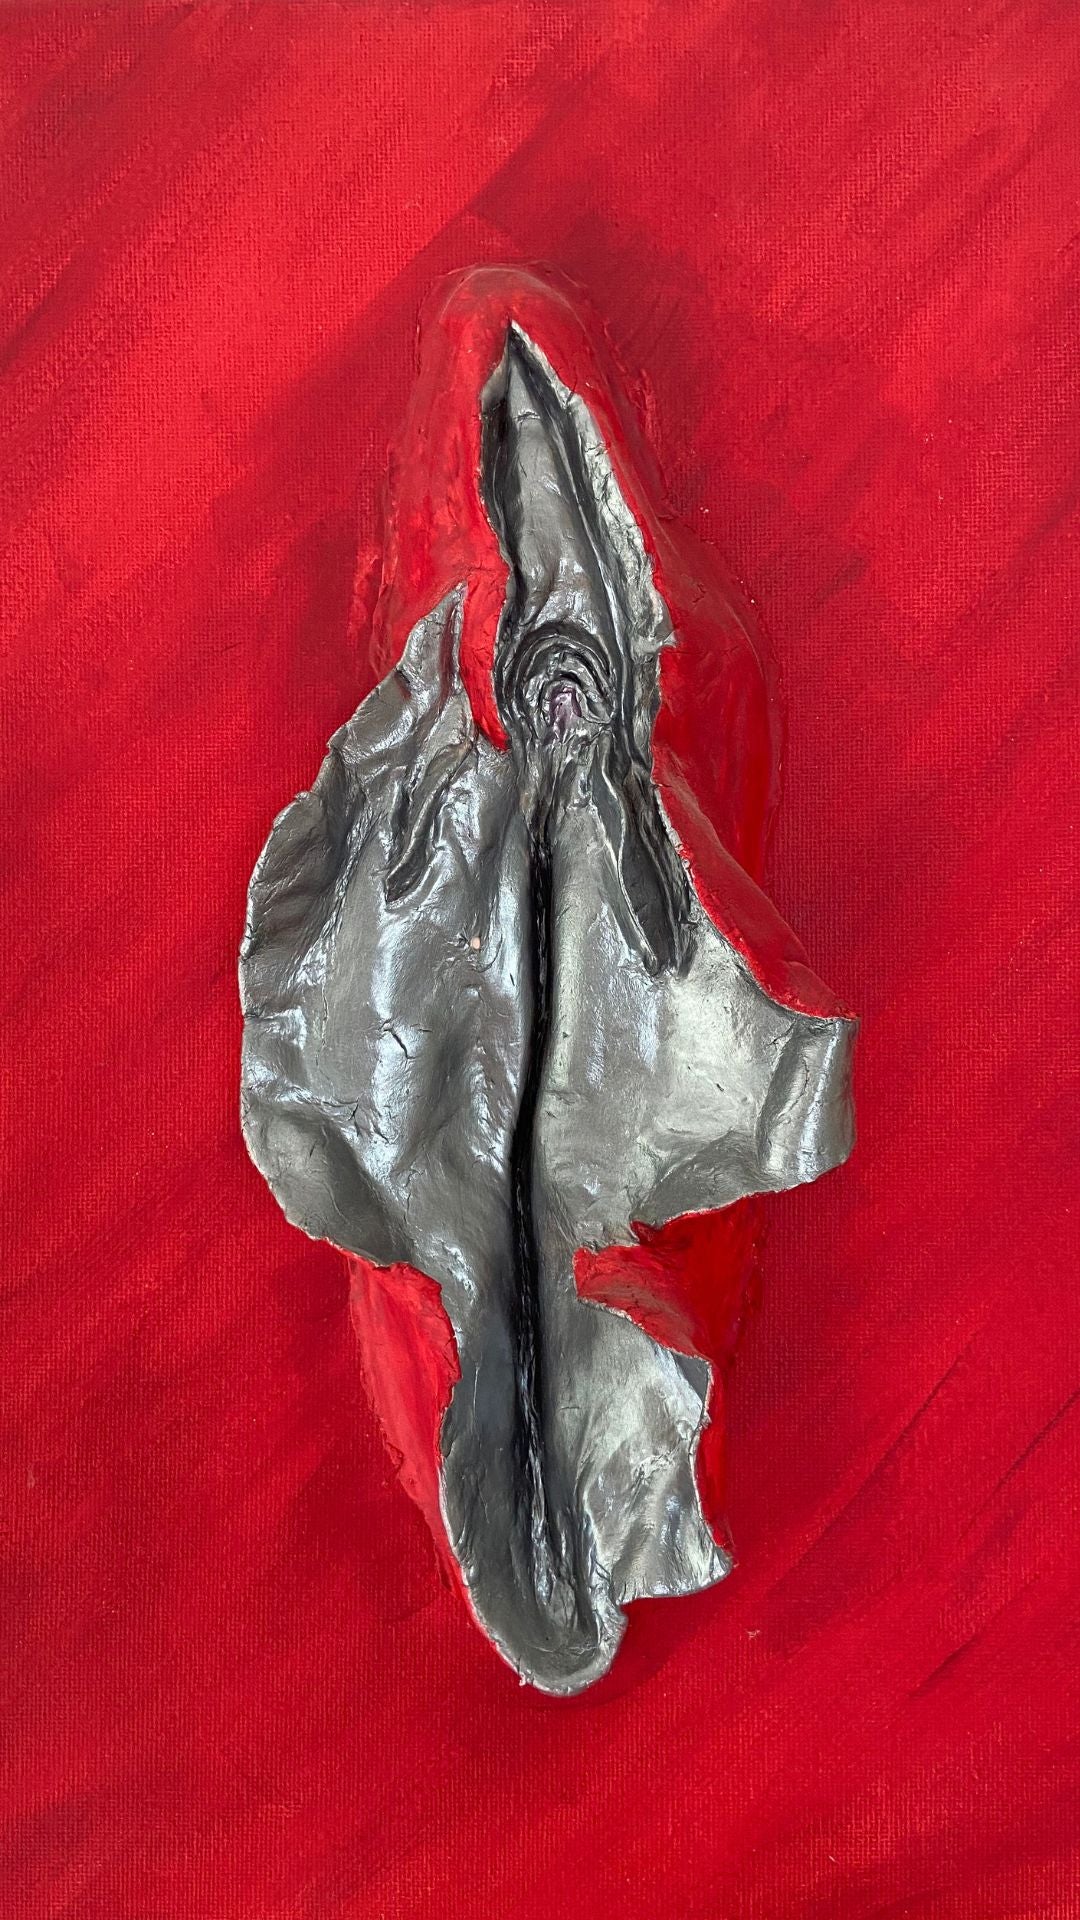 A photo of Sarah Lemmerman's original silver vulva sculpture mounted on red canvas. The inner labia glistens in metallic silver in contrast to the bright red surroundings.